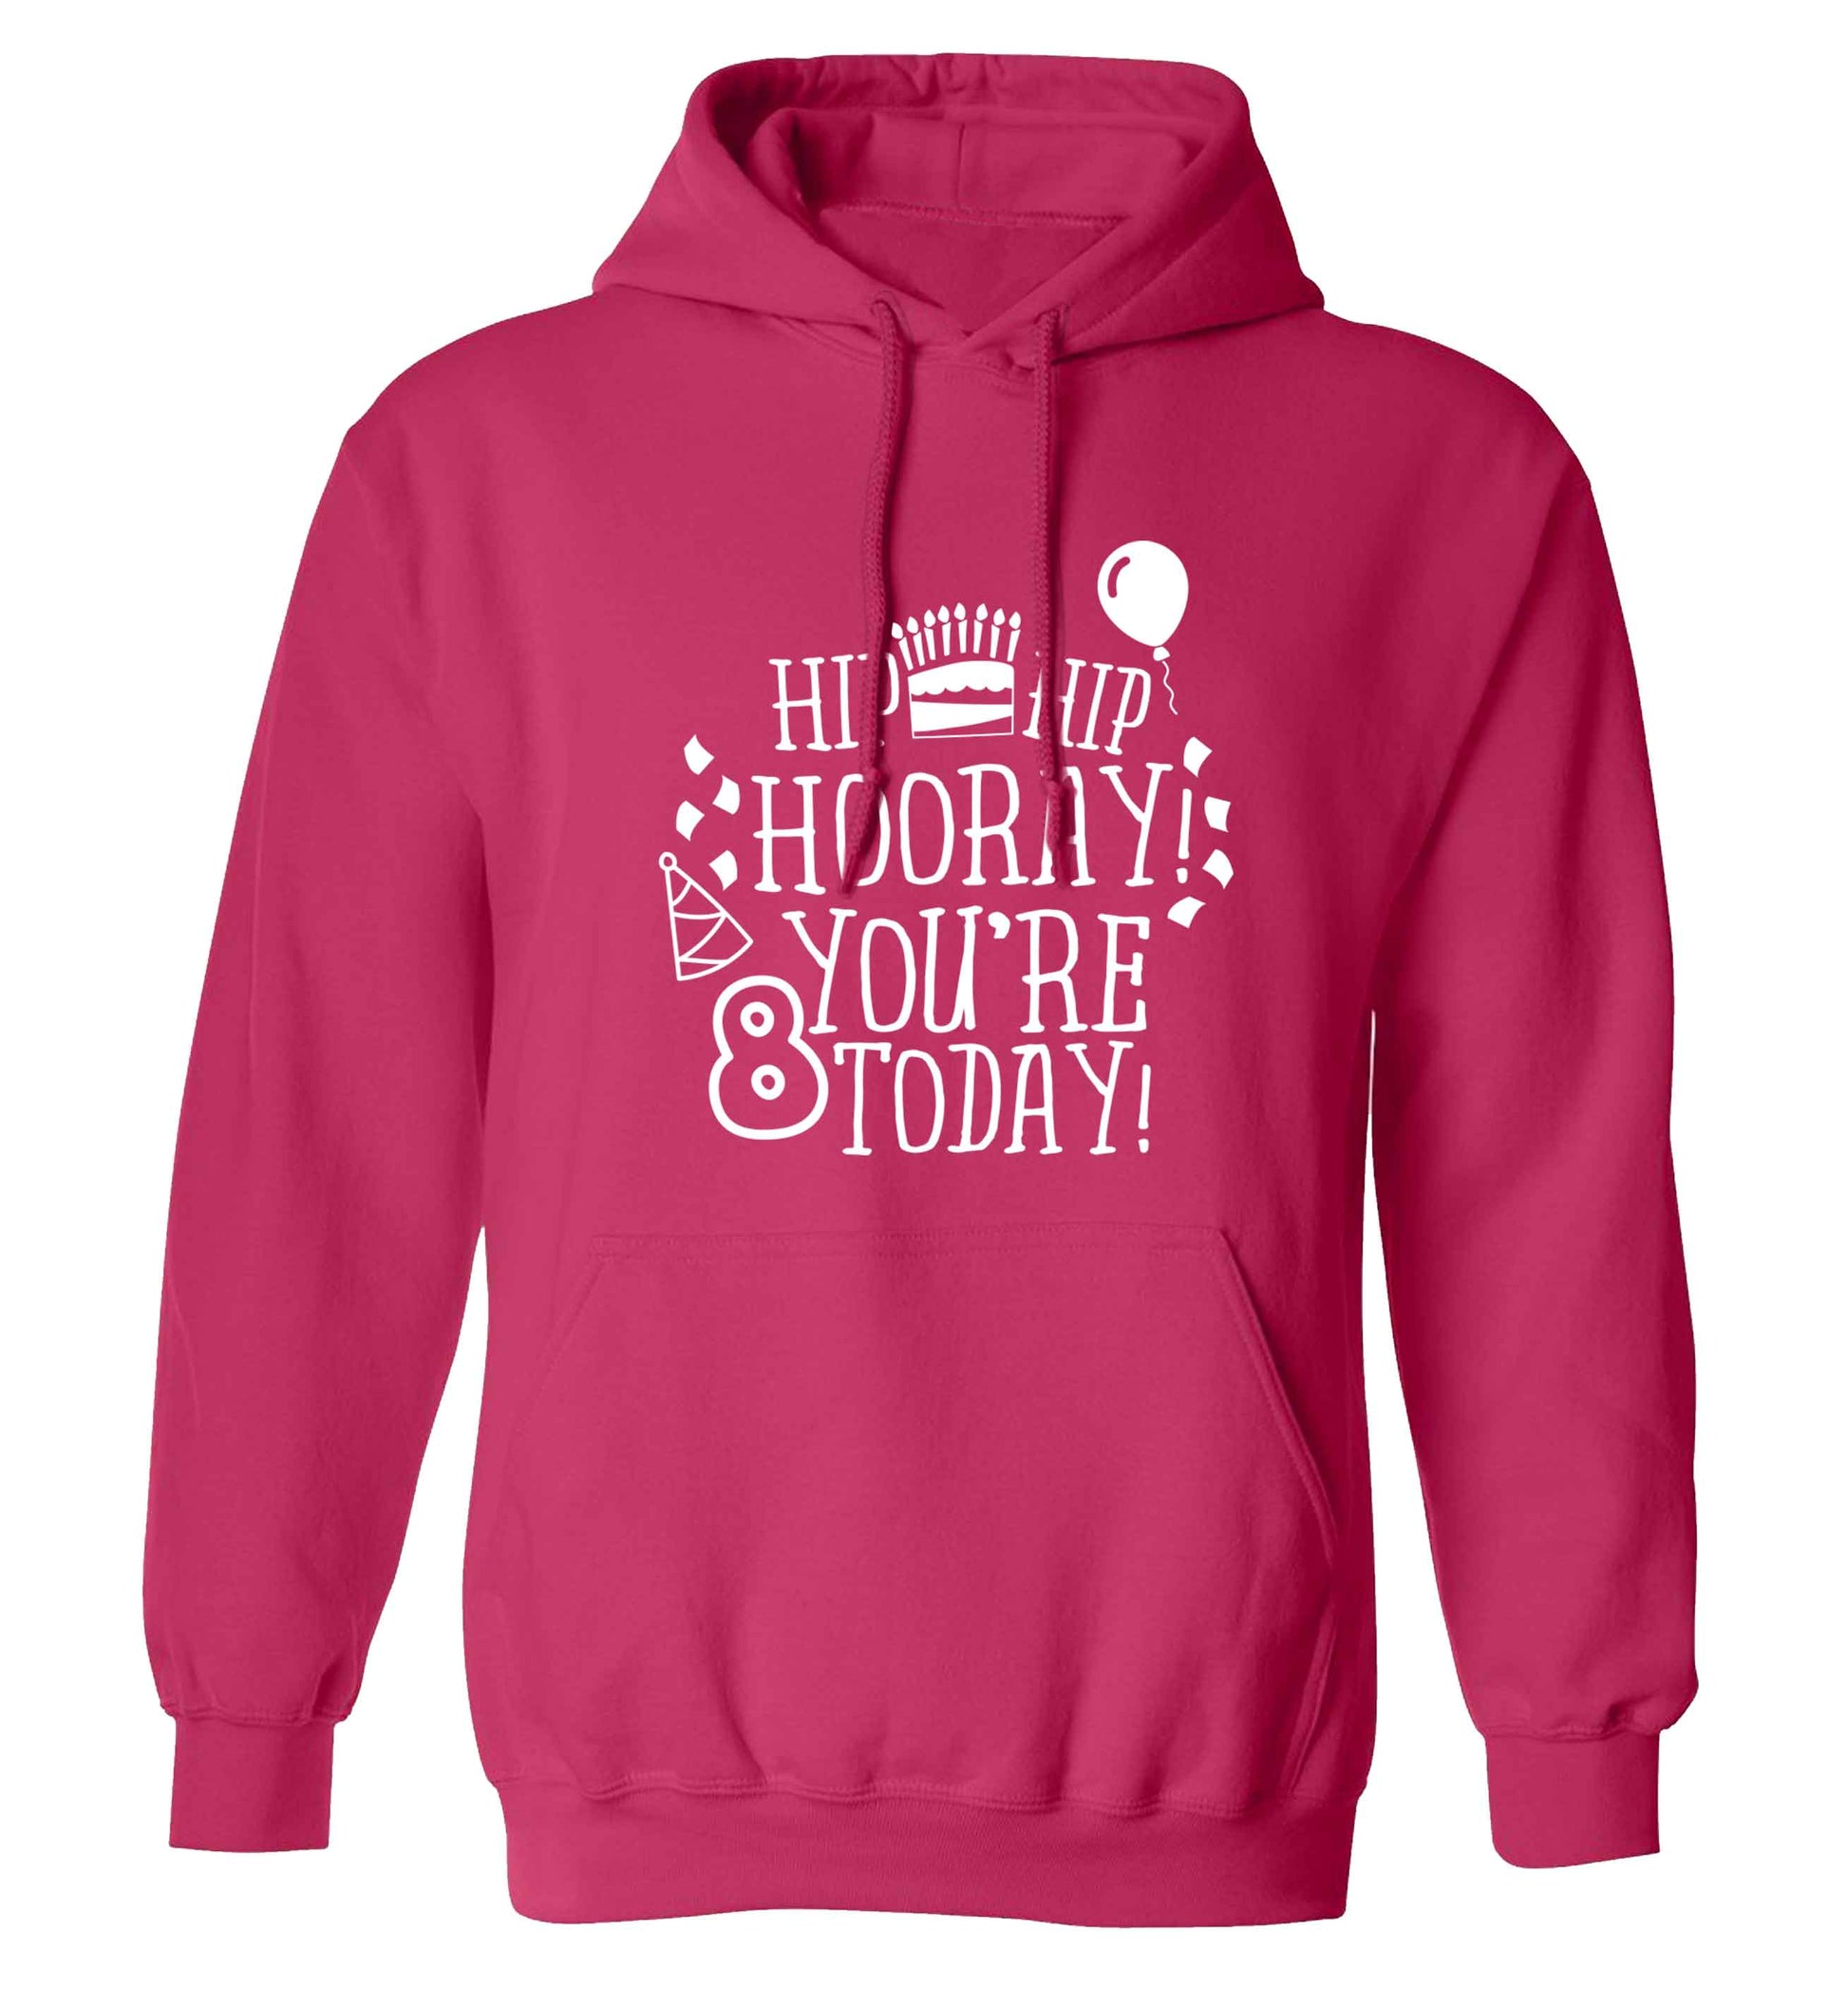 Hip hip hooray you're 8 today! adults unisex pink hoodie 2XL